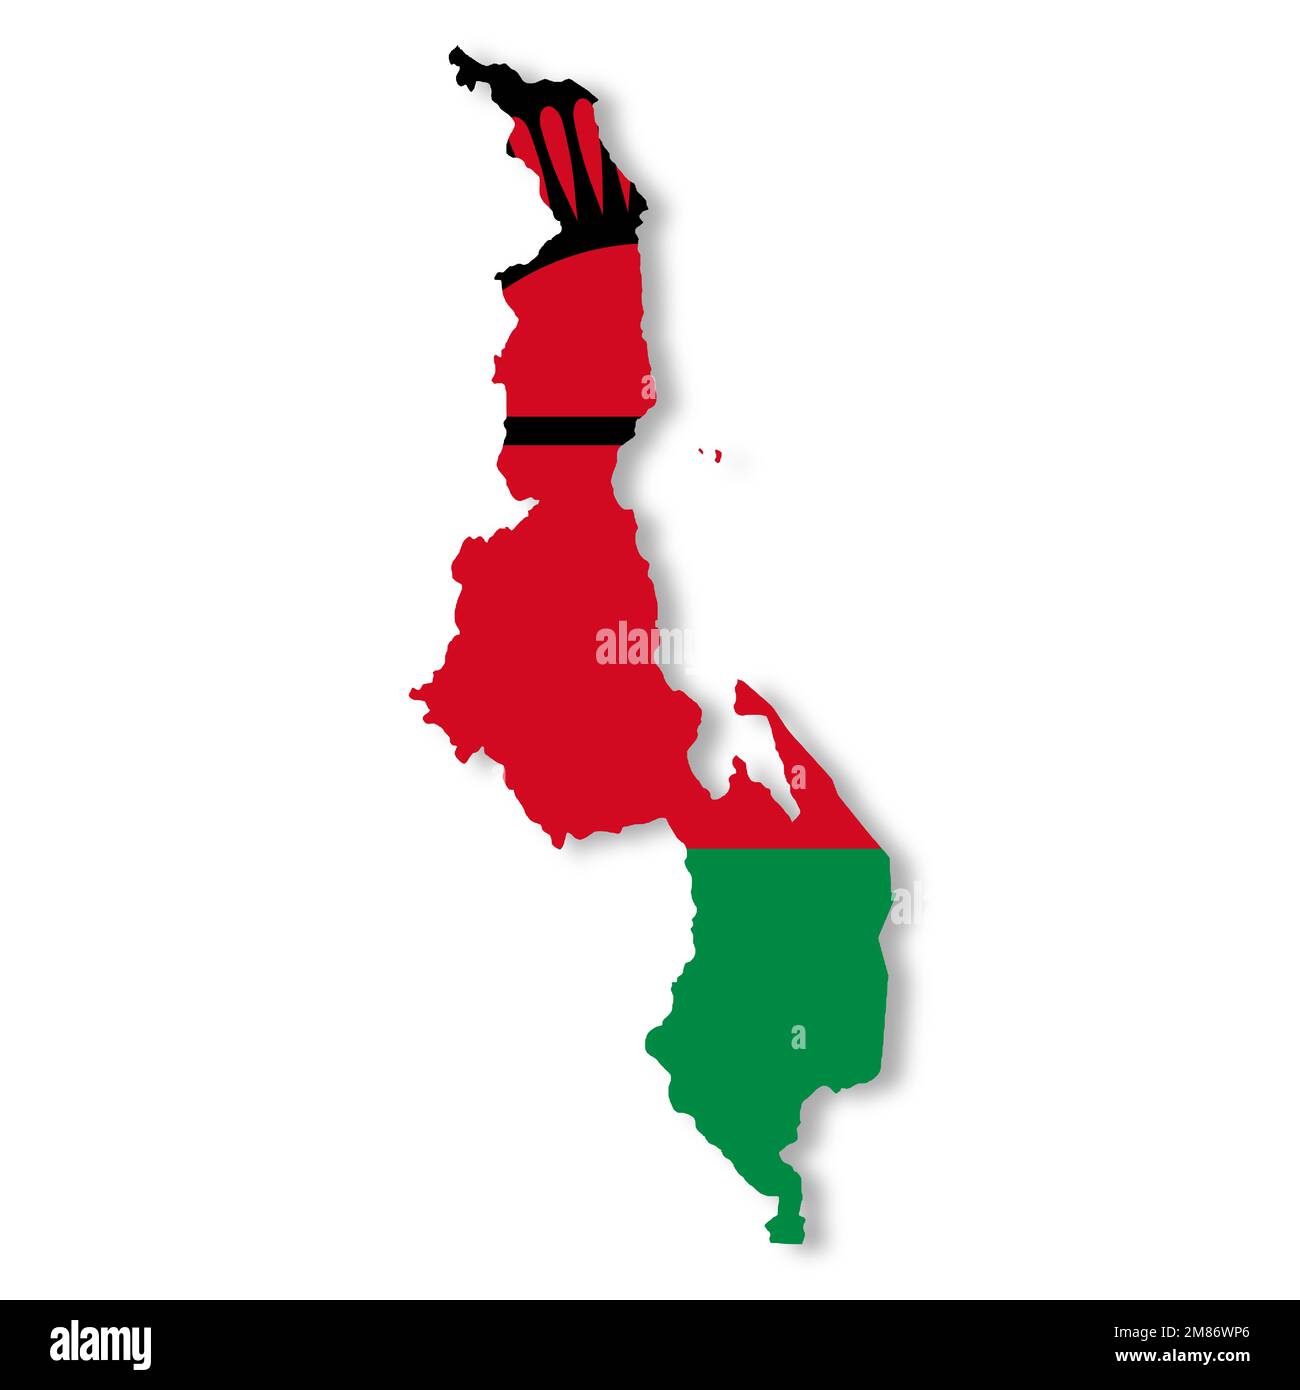 A Malawi flag map with clipping path 3d illustration Stock Photo